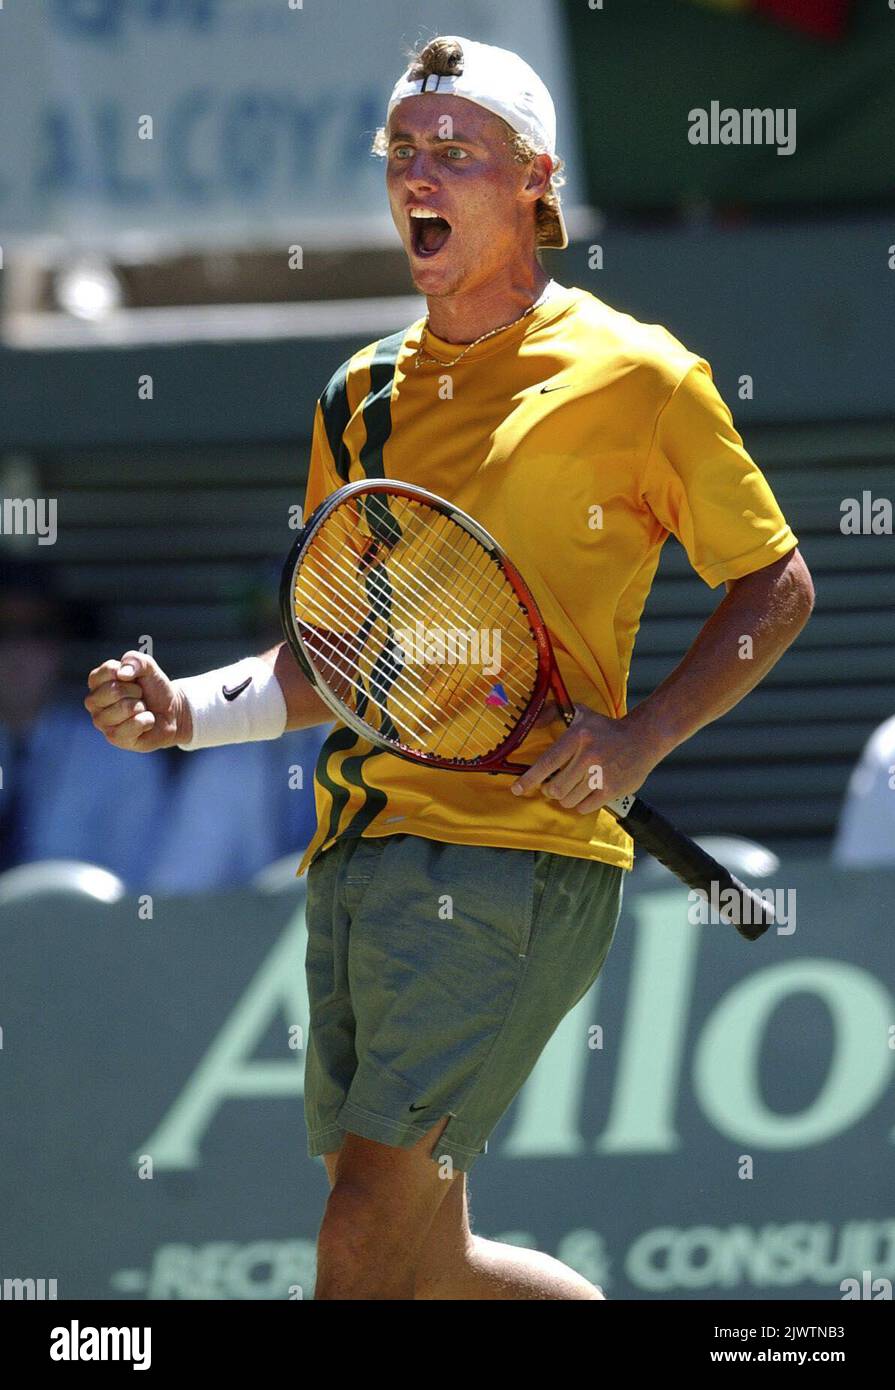 Australian Lleyton Hewitt celebrates winning the first rubber of the Davis Cup Final at Rod Laver Arena today